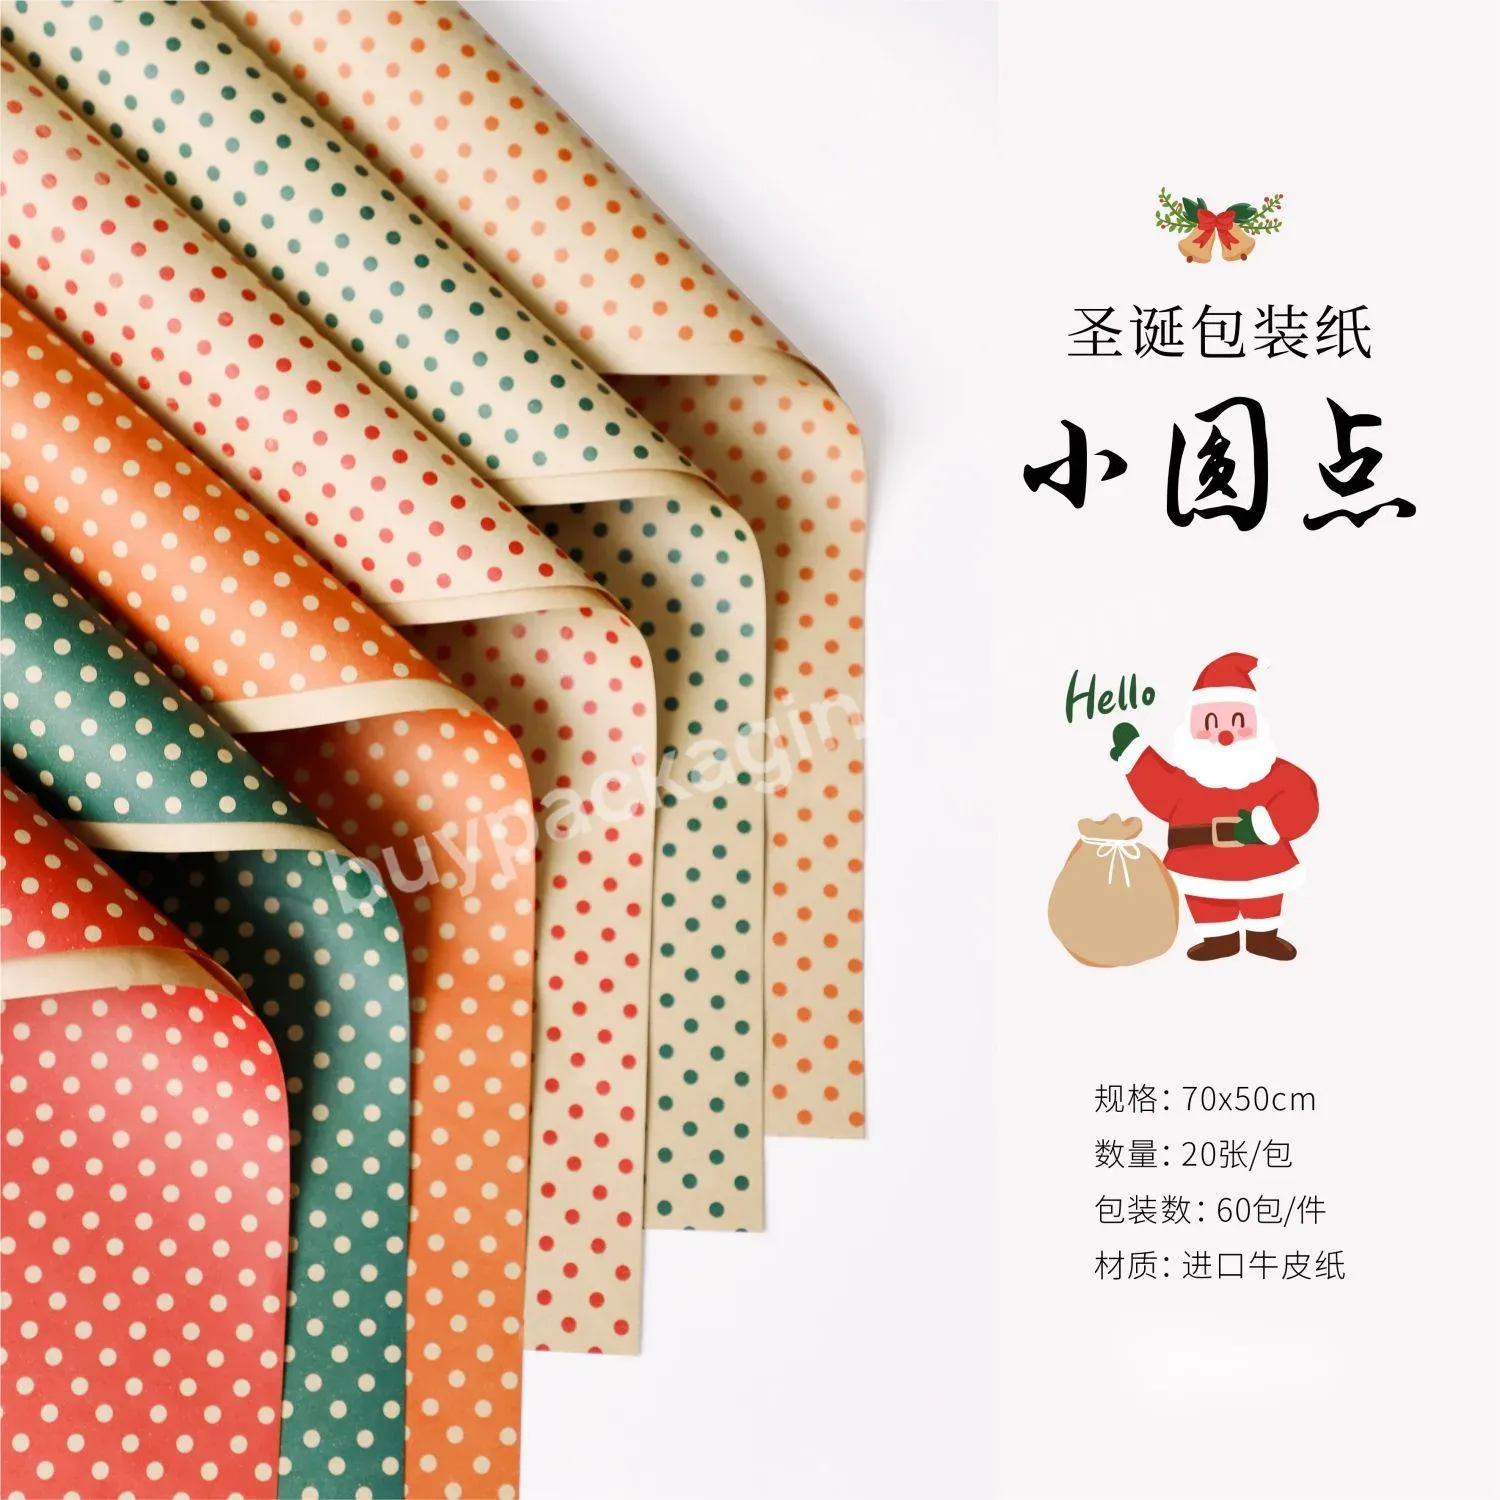 2022 New Dot Design Printed 50*70cm 20pcs/bag Gift Wrapping Paper For Gift Box Packing - Buy 2022 New Dot Design Printed Gift Wrapping Paper,50*70cm 20pcs/bag Gift Wrapping Paper,Gift Wrapping Paper For Gift Box Packing.